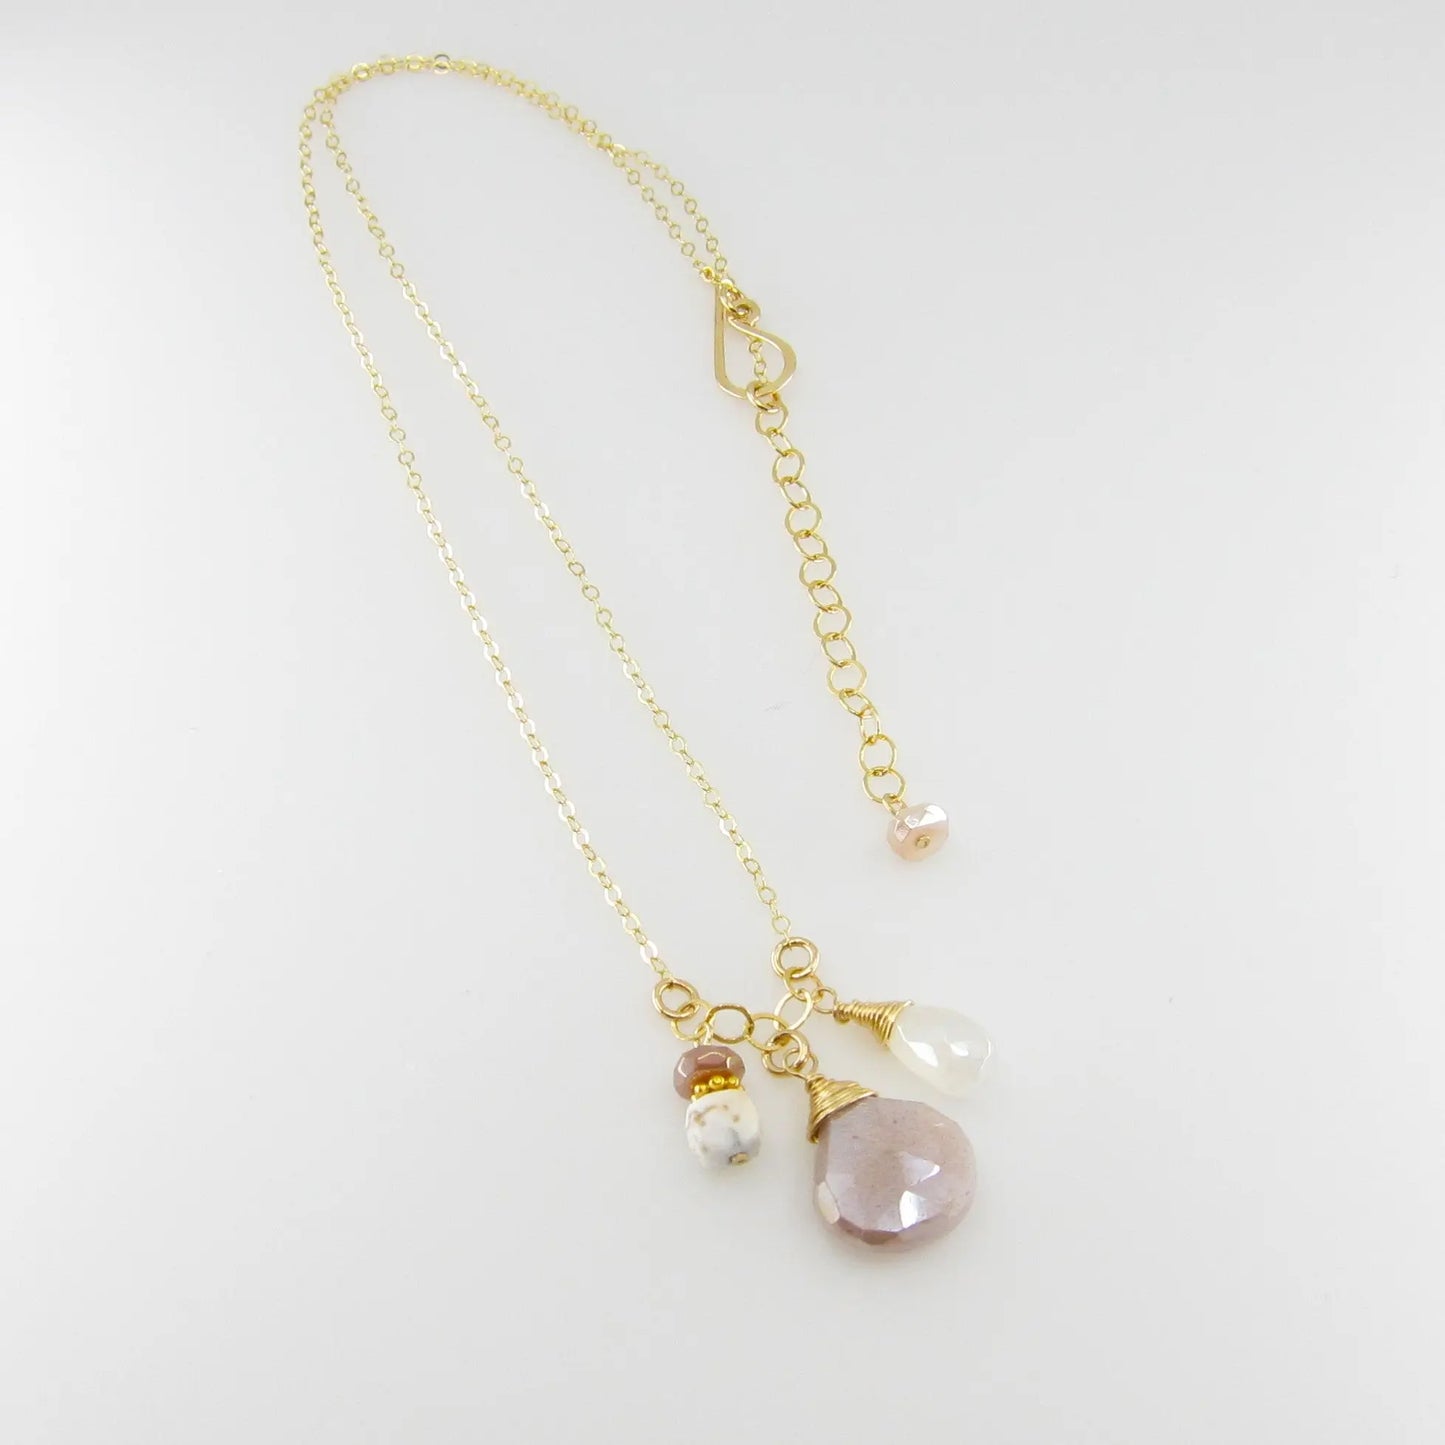 Small Gemstone Cascade Necklace with Champagne Moonstone J.Mills Studio